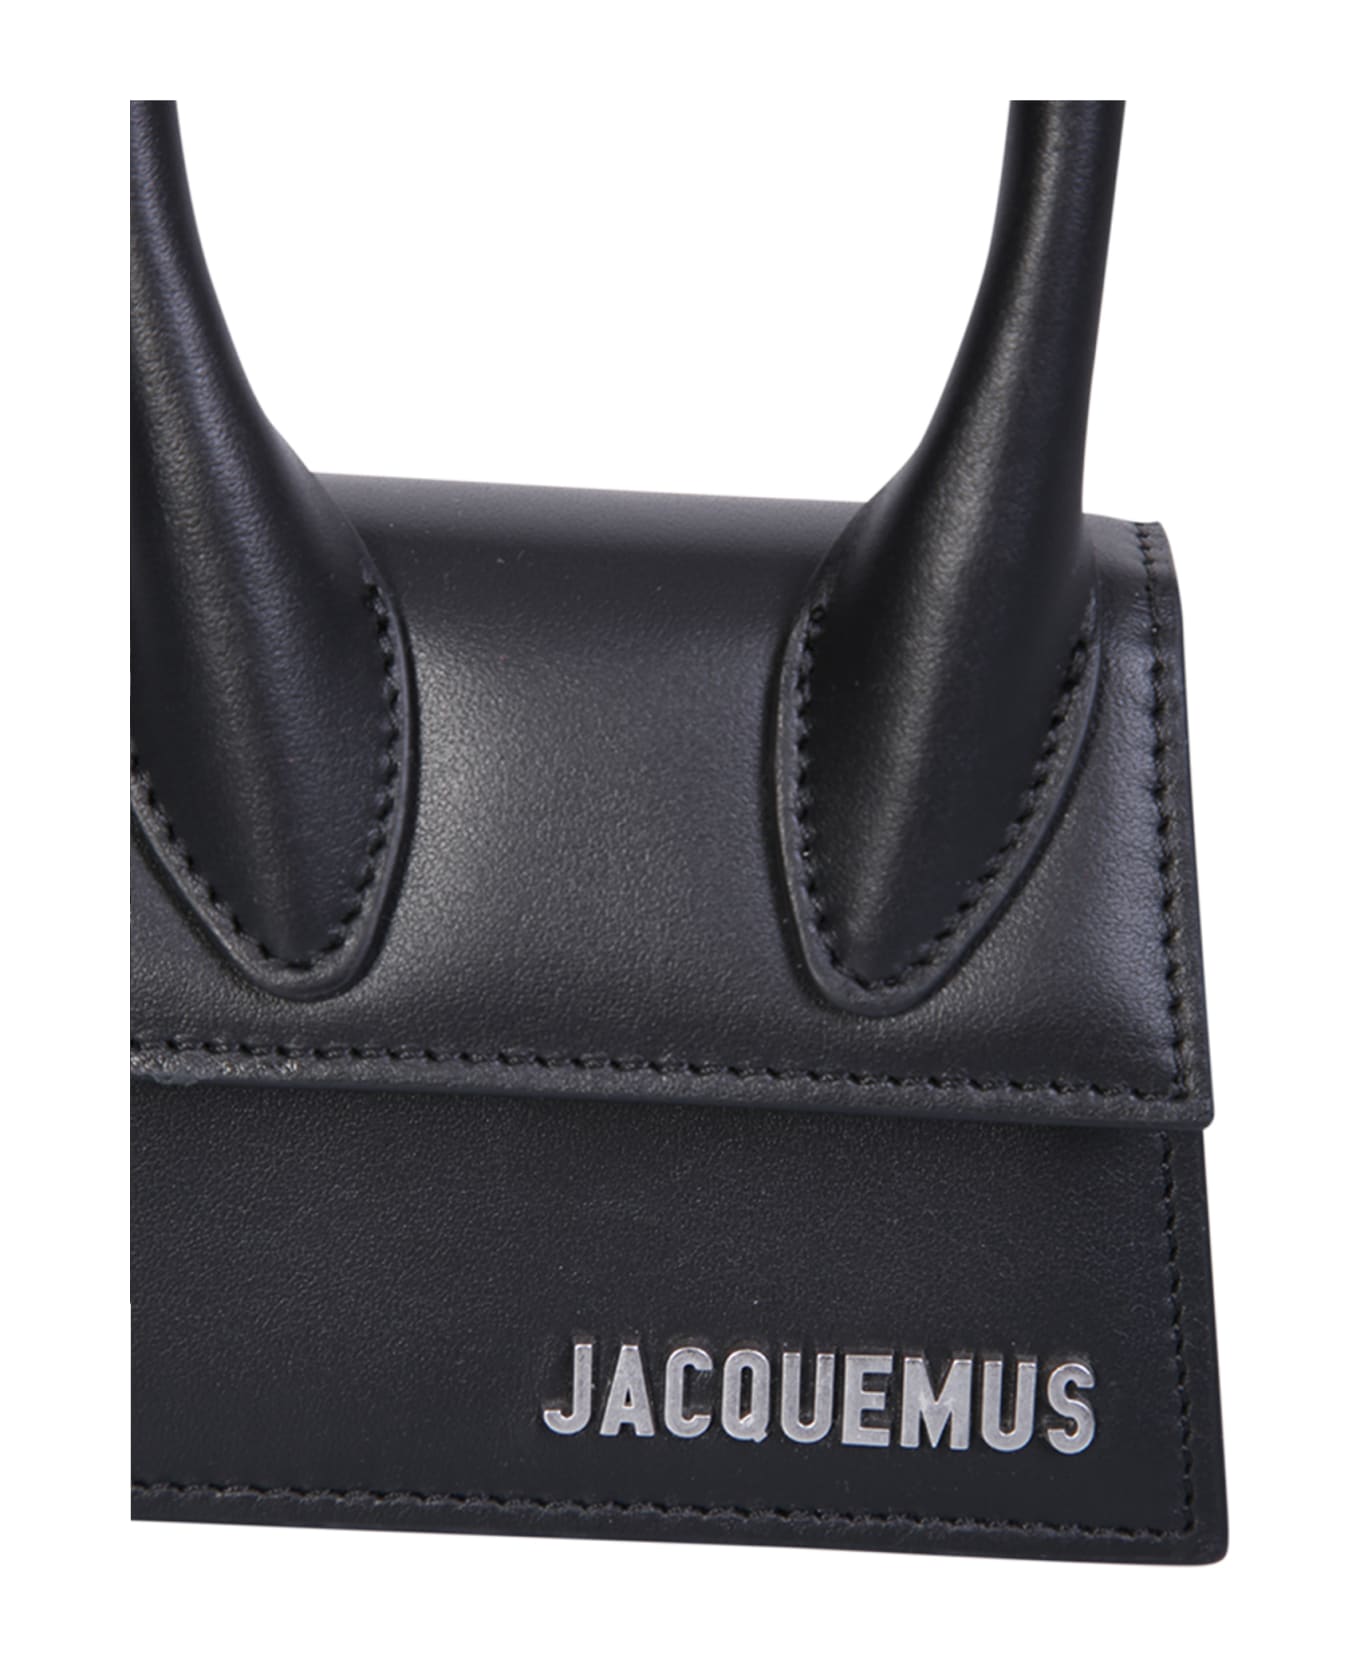 Jacquemus Le Chiquito Homme Bag - 990 トートバッグ